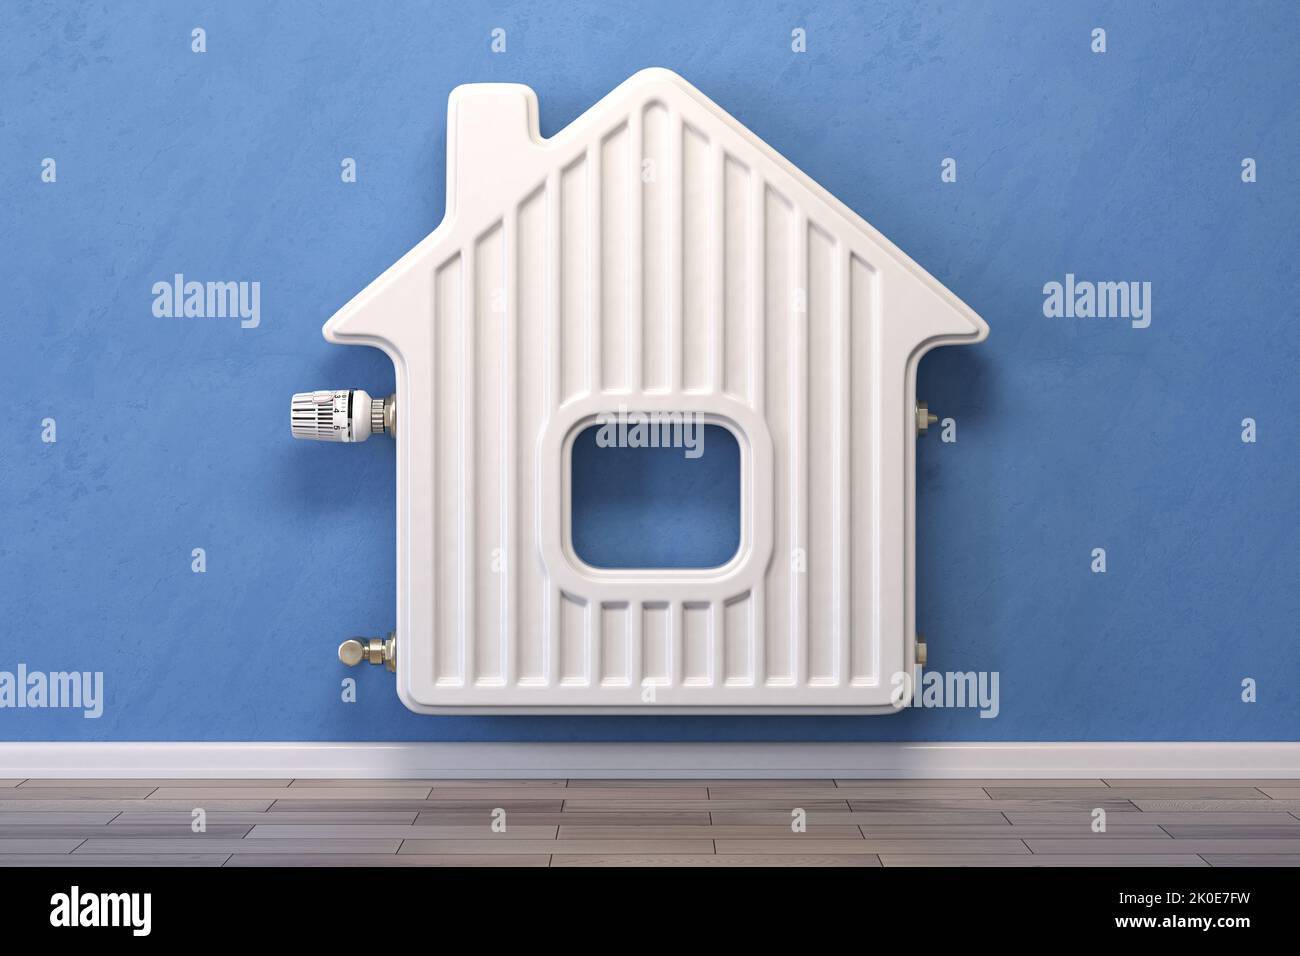 Home heating radiator in the form of house. 3d illustration Stock Photo